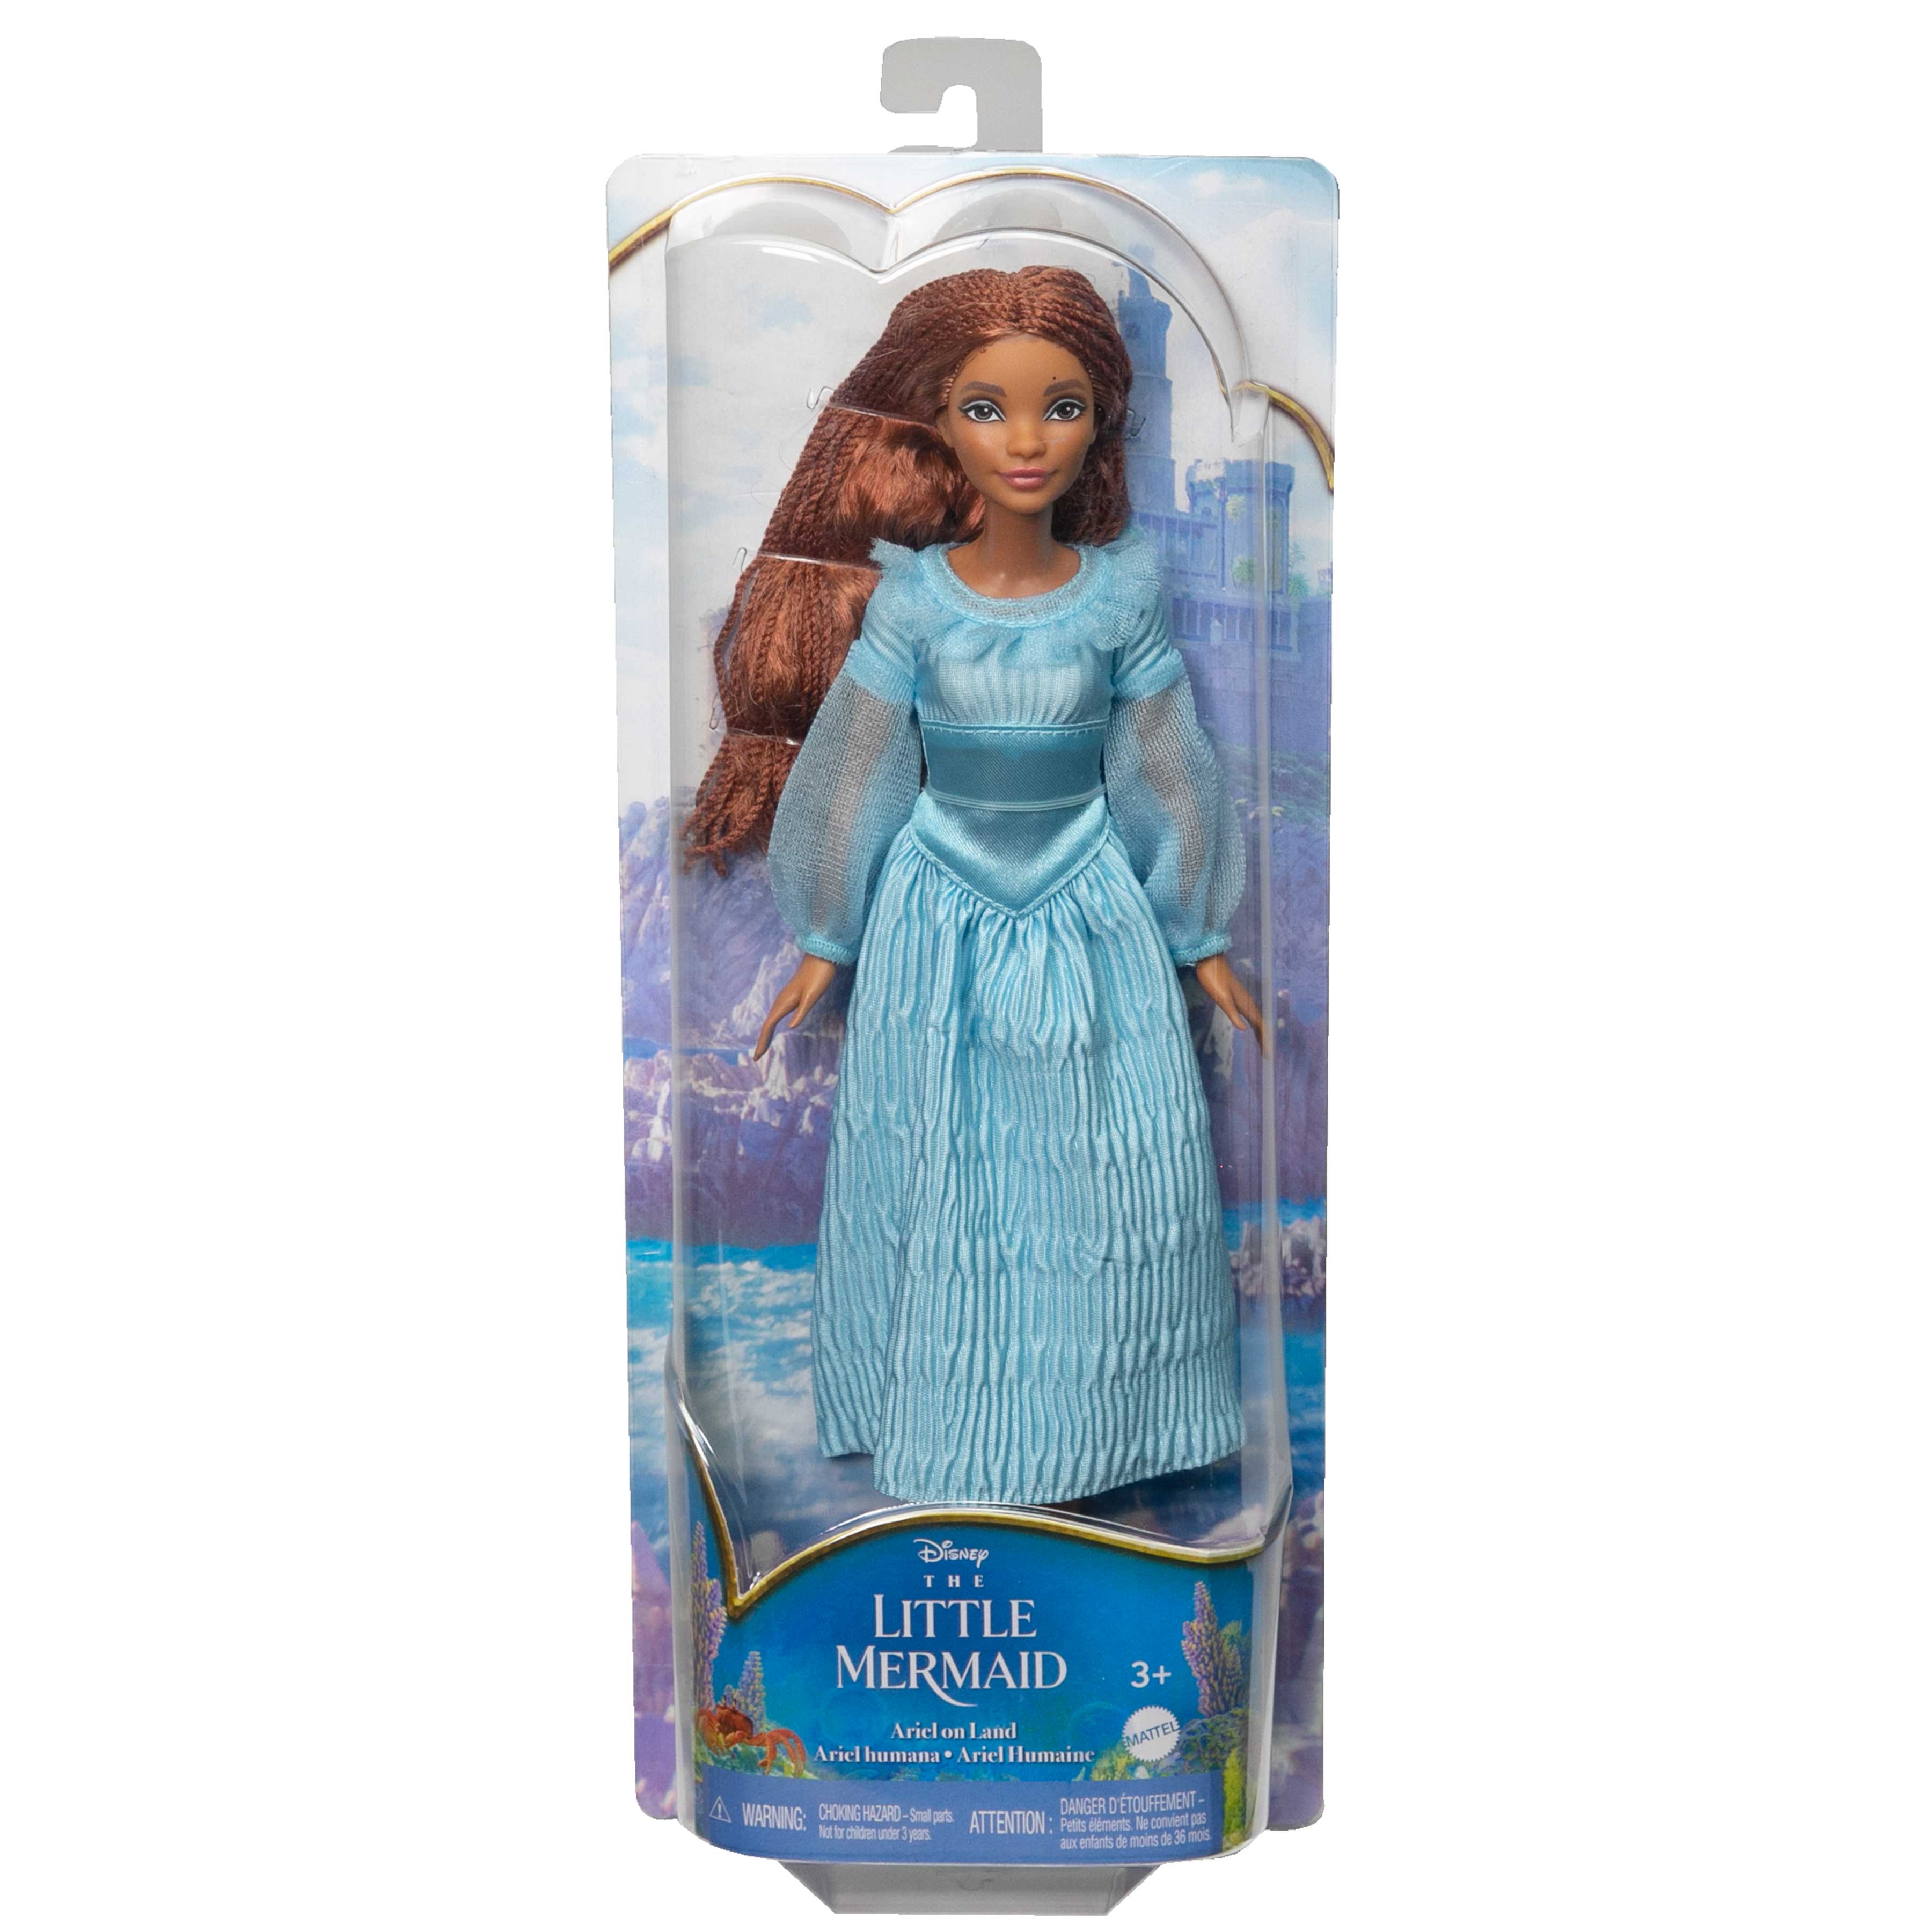 Disney Princess Little Mermaid Ariel Fashion Doll on Land in Signature Blue Dress Inspired by Disney’s The Little Mermaid for Kids Ages 3+